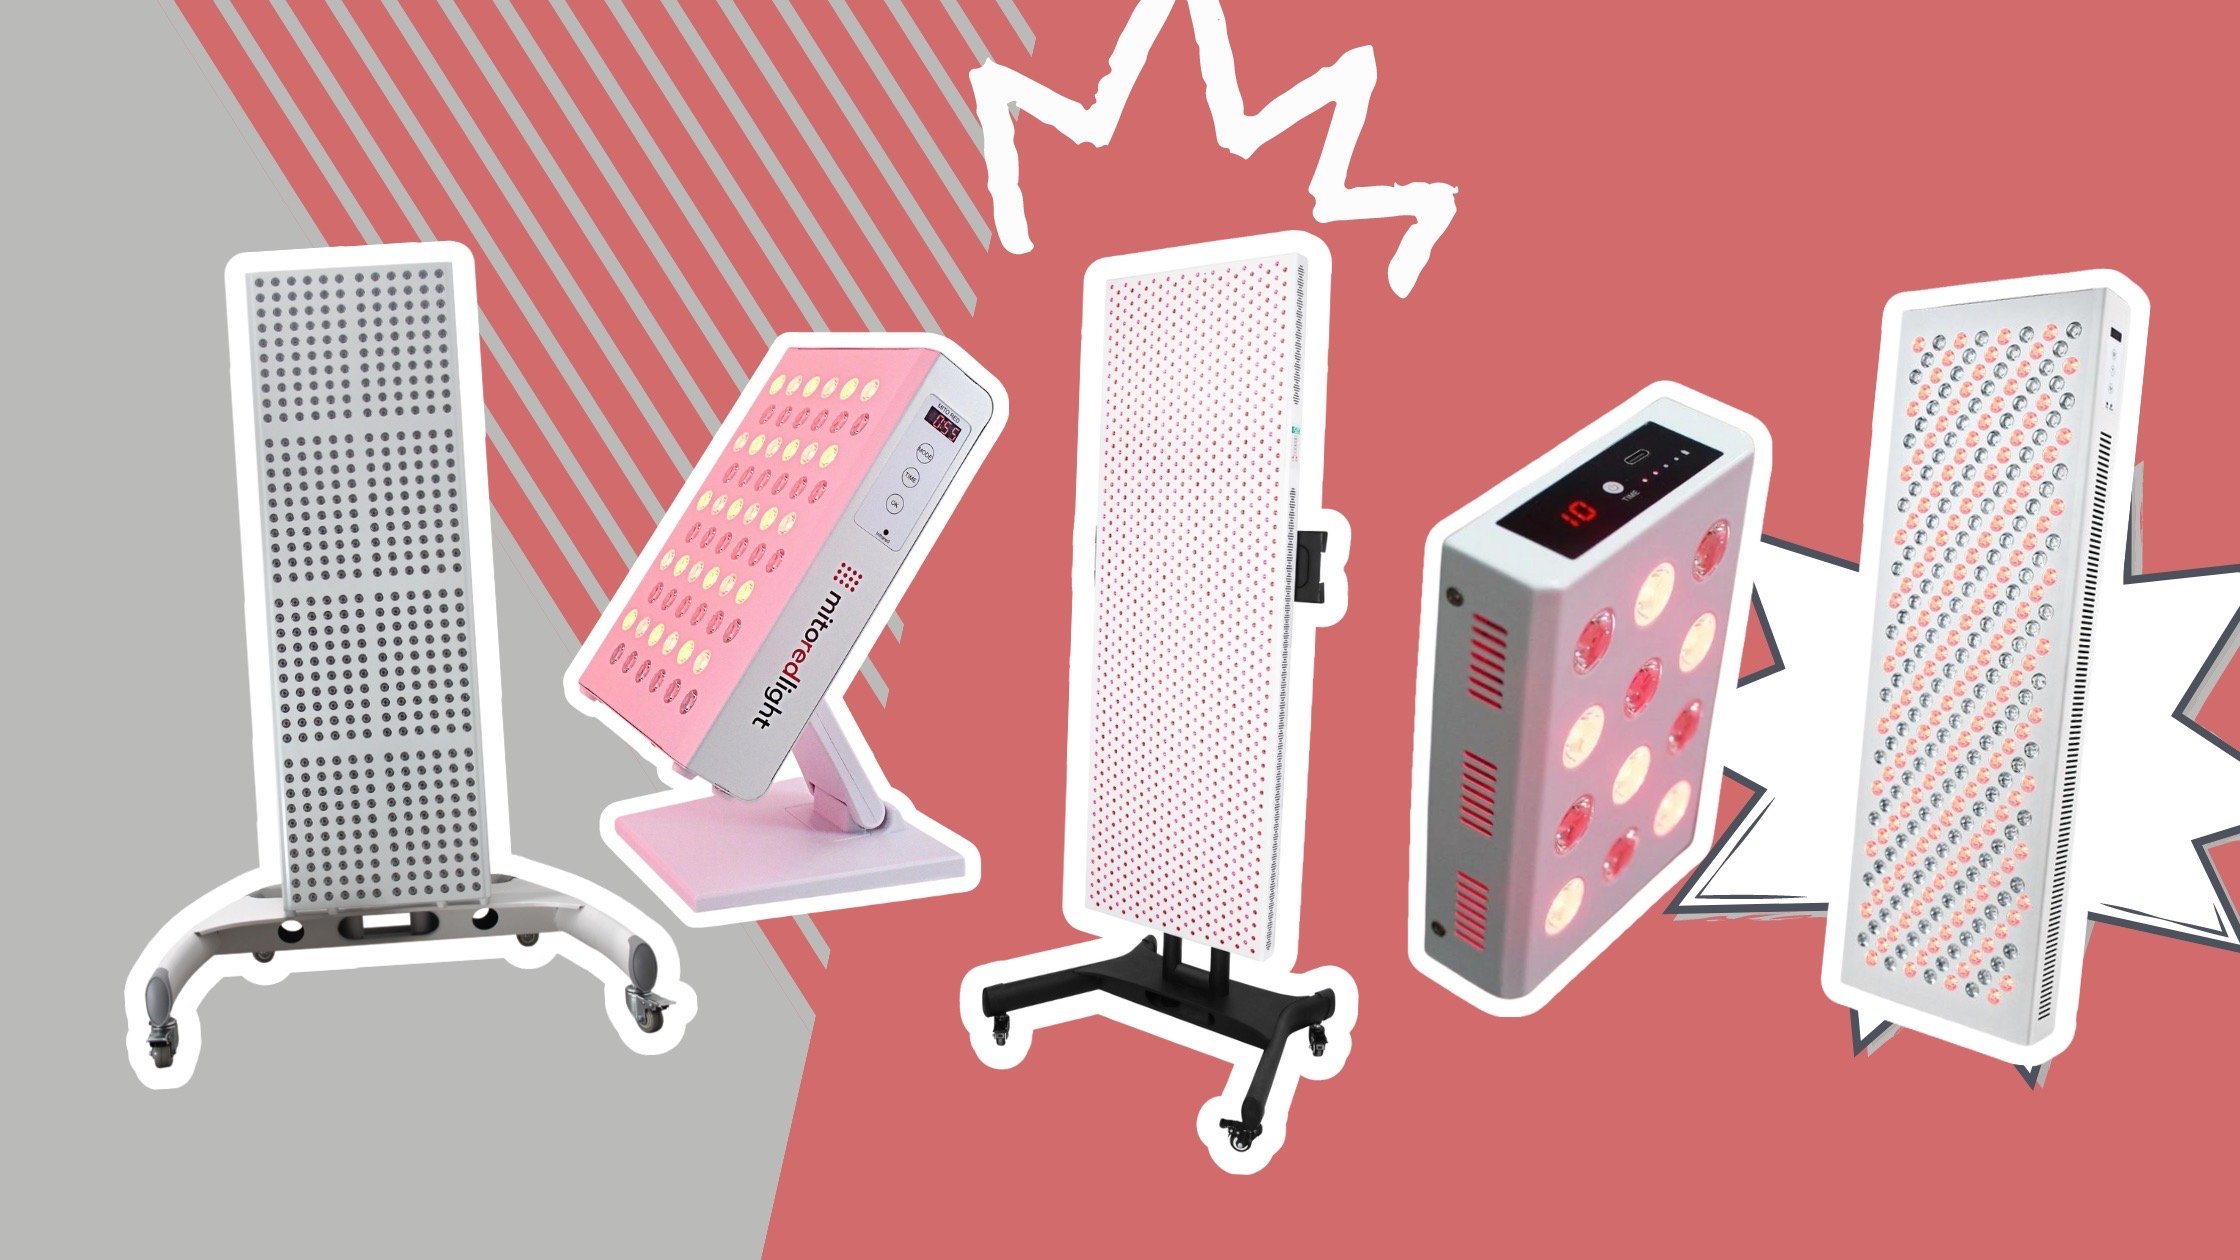 The Benefits Of Red Light Therapy Devices—A Vital Red Light Review